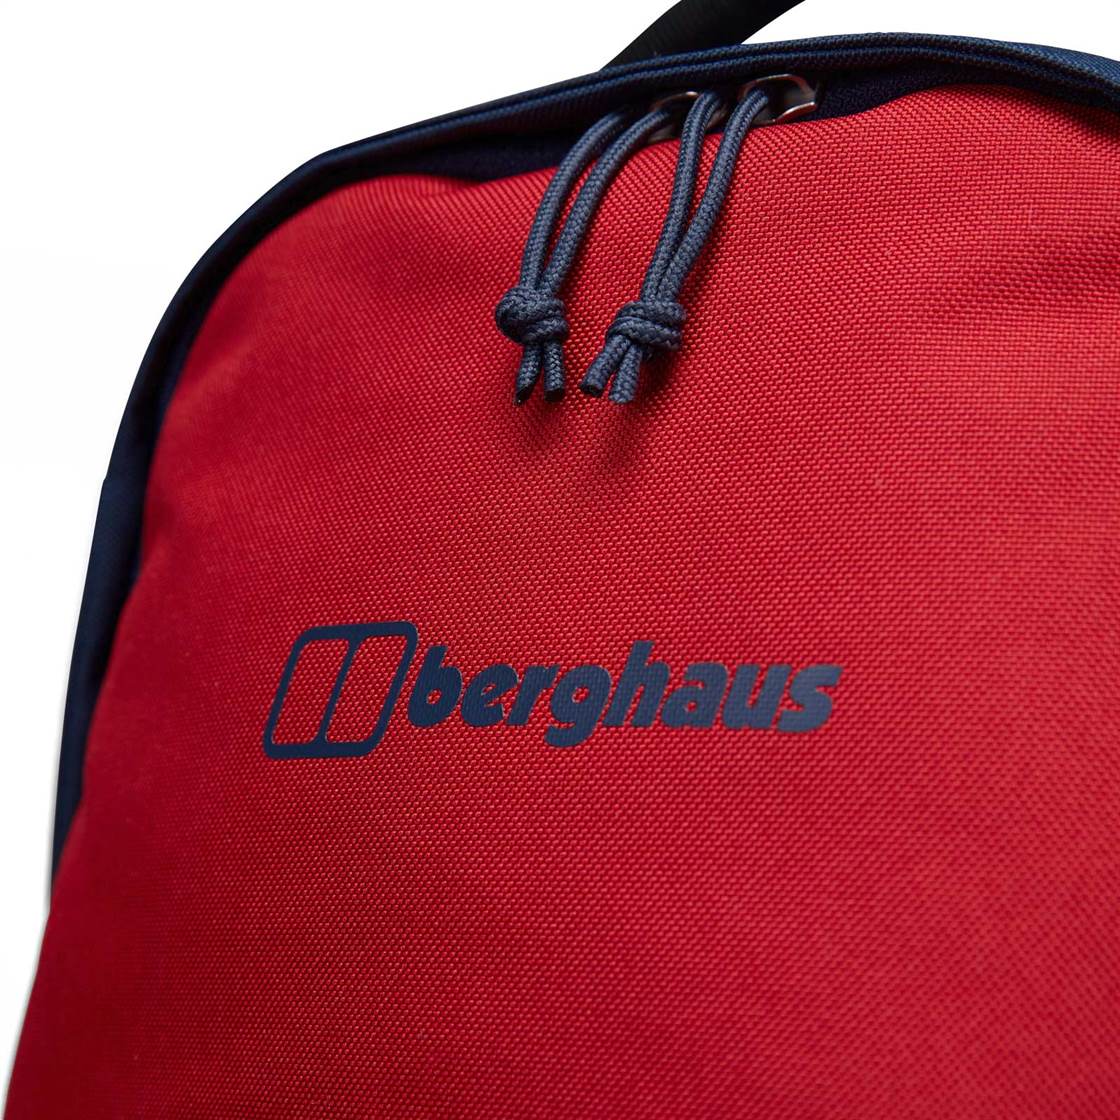 BERGHAUS RECOGNITION 25L BACKPACK